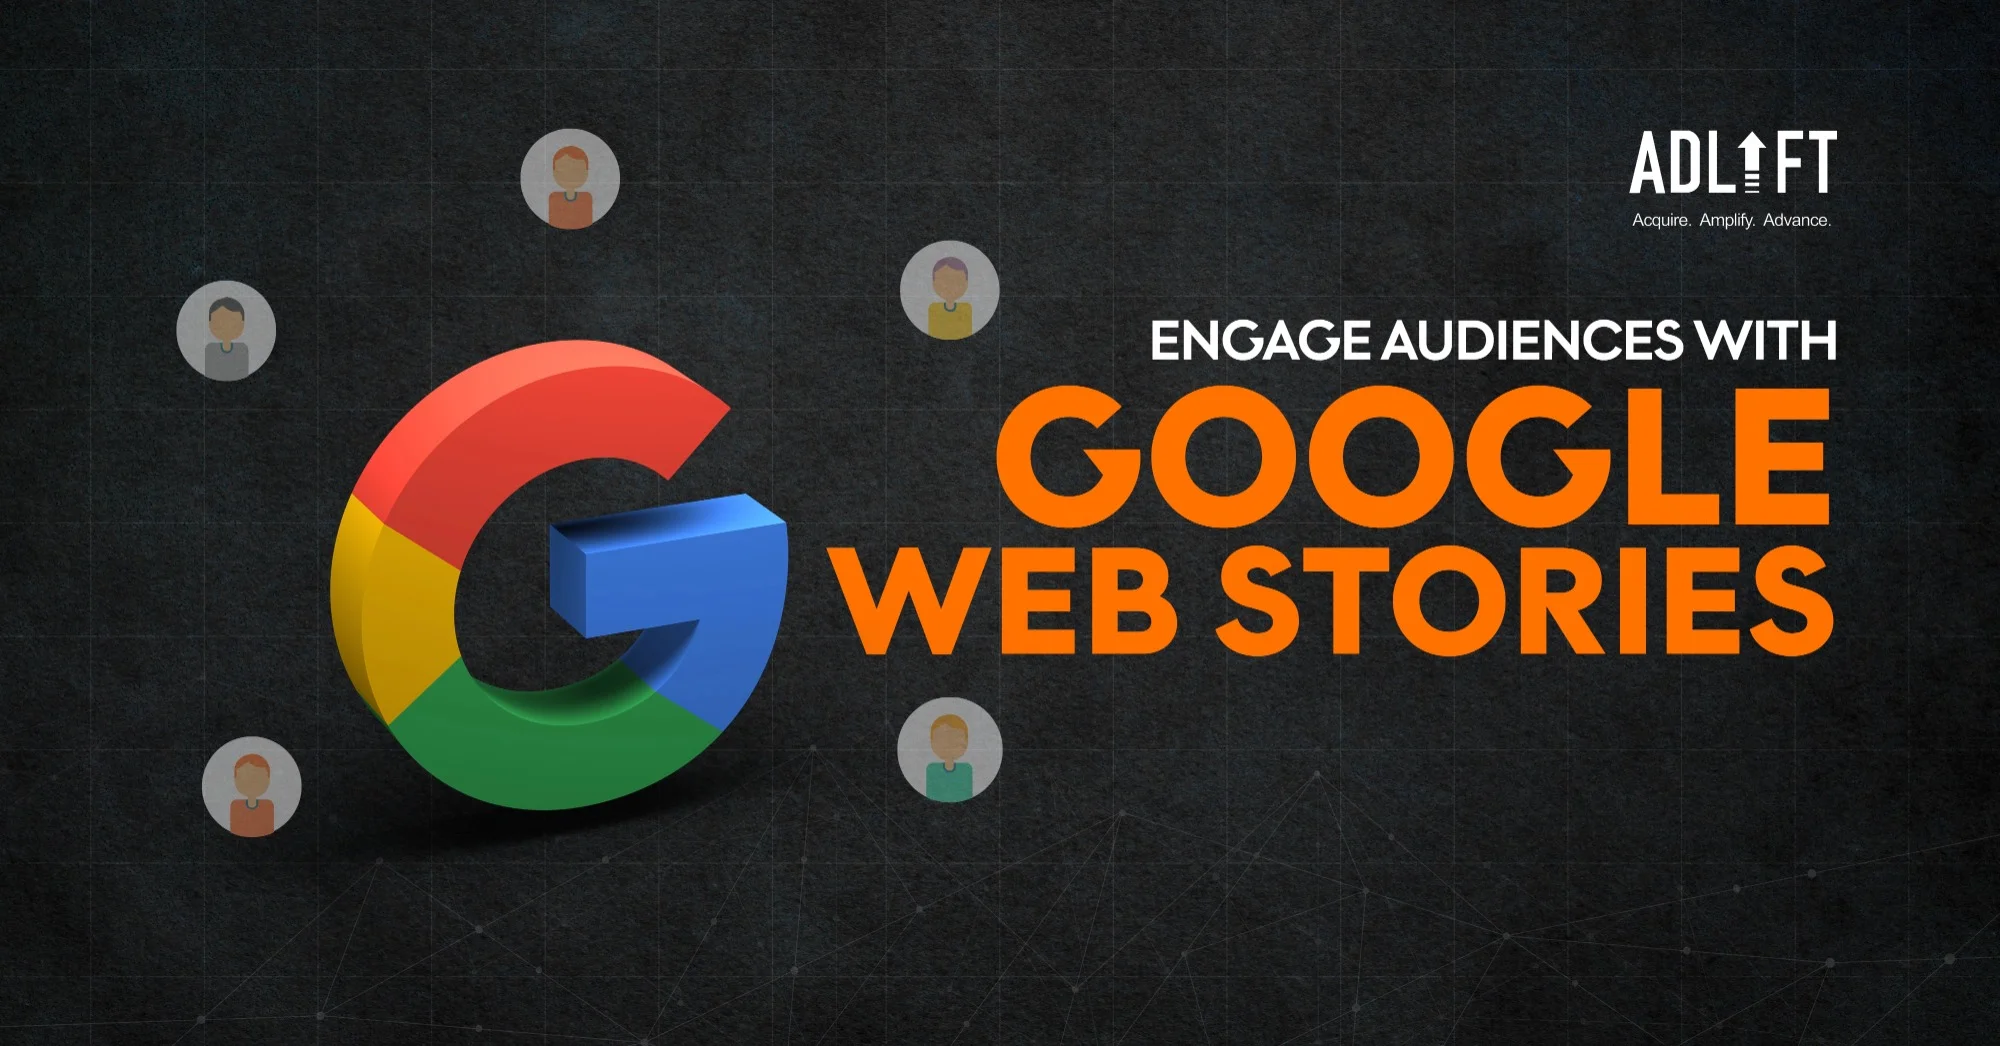 Here’s How you can Engage Your Audience with Google Web Stories